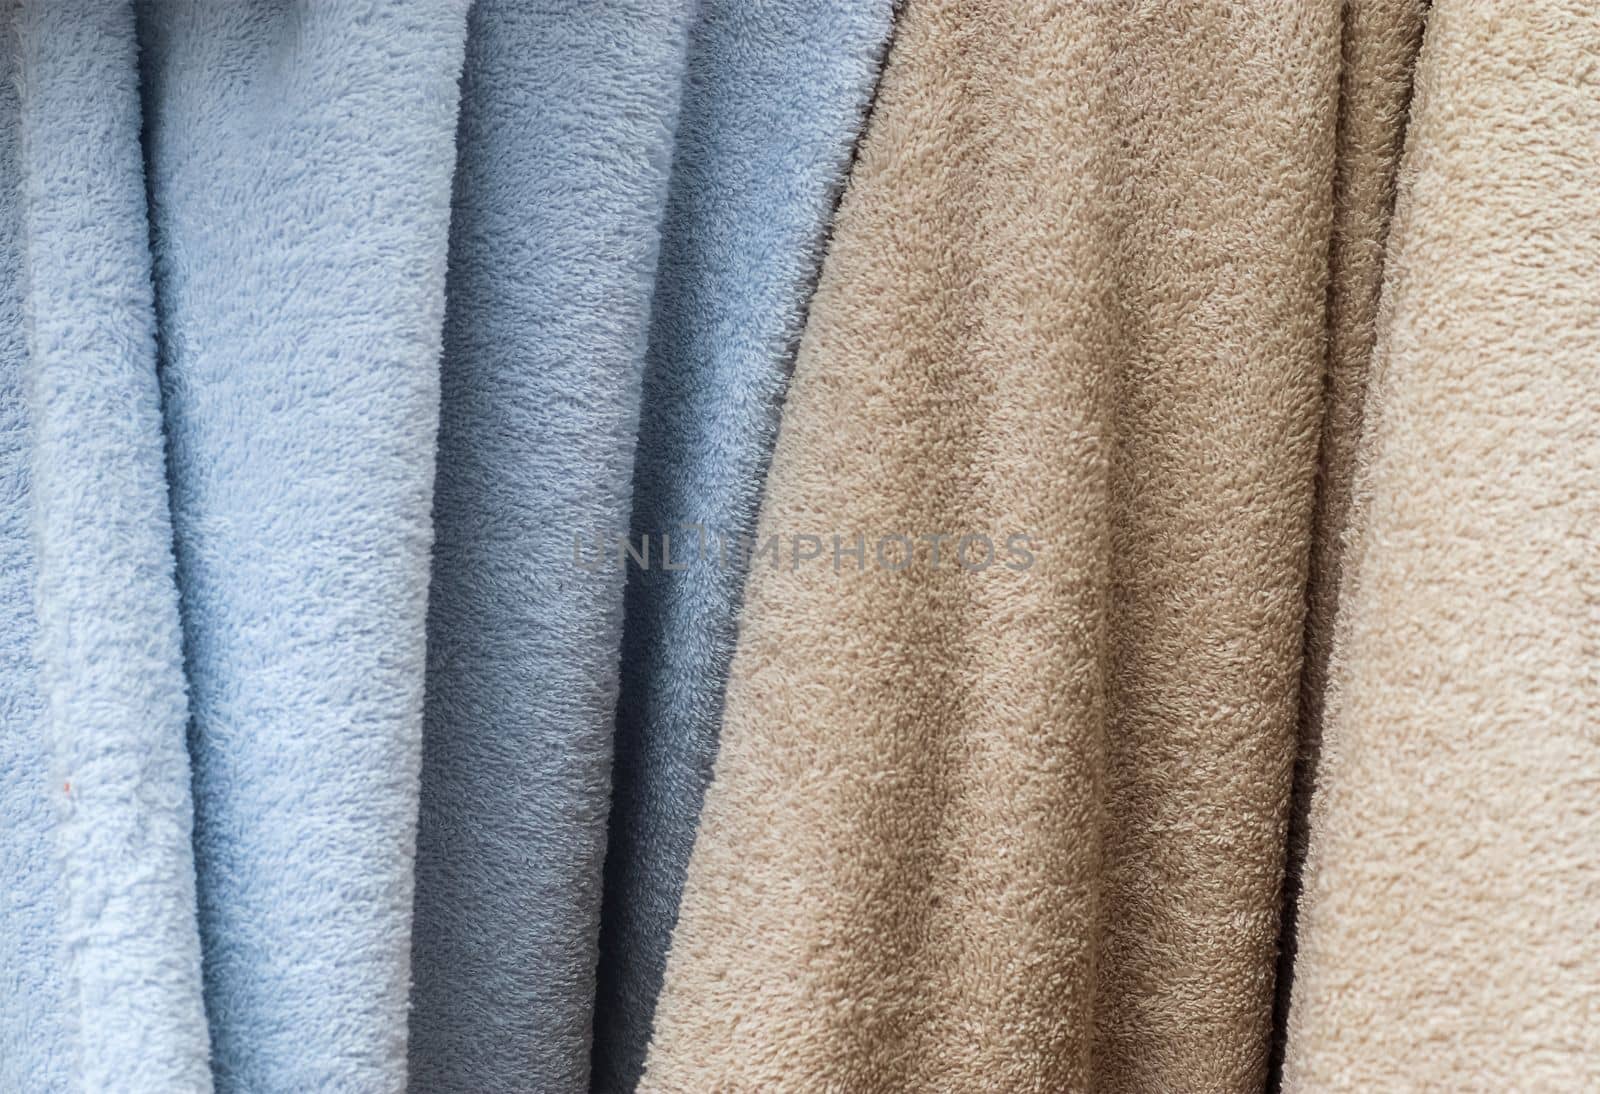 Samples of cloth and fabrics in different colors found at a fabrics market by MP_foto71